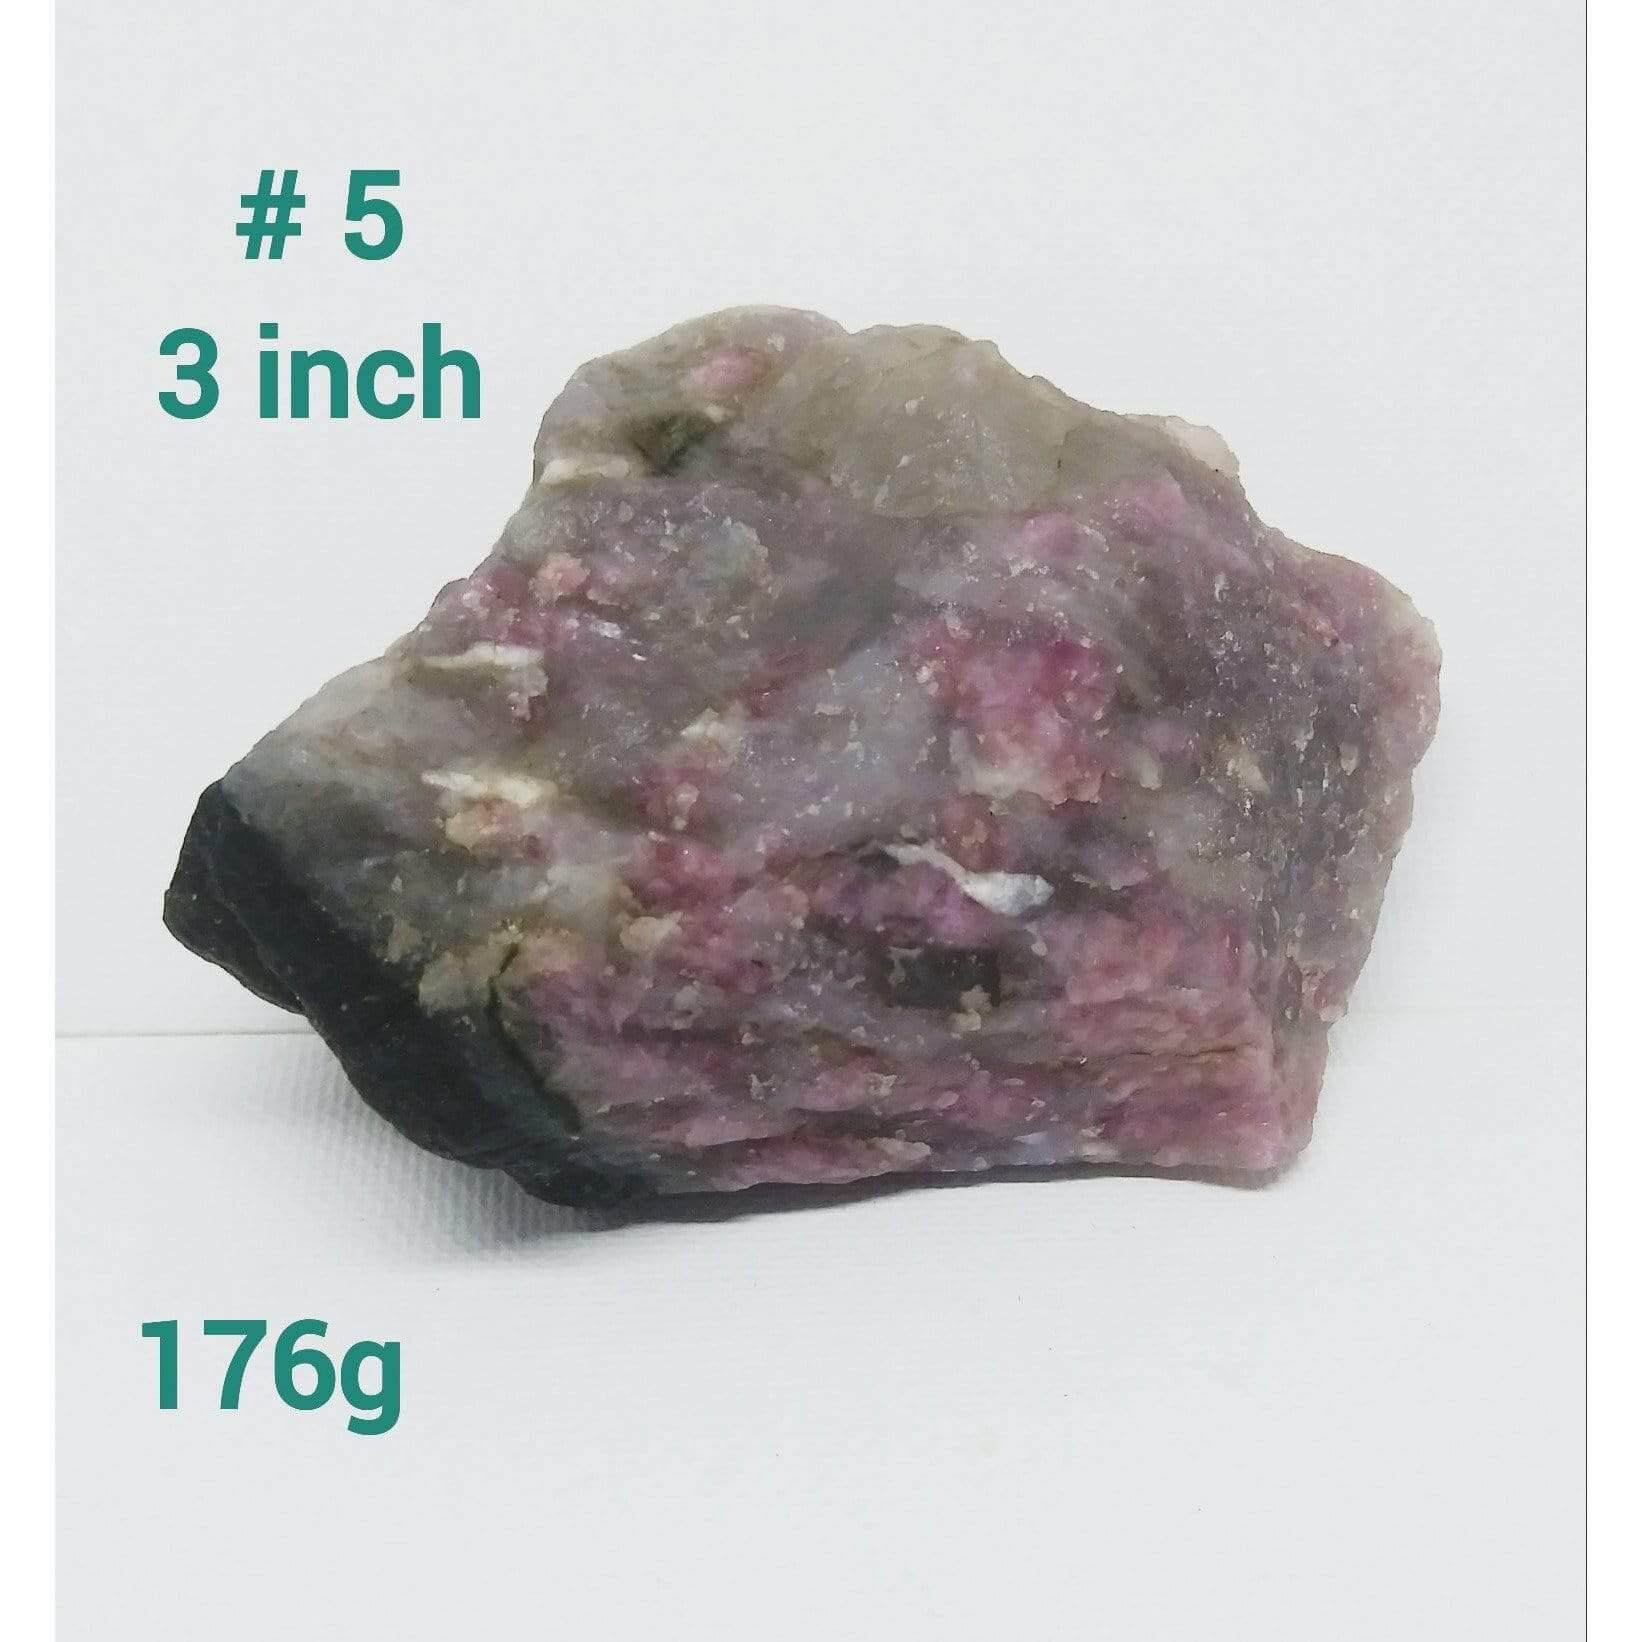 Plum Blossom Tourmaline reducing stress & anxiety crystal gemstone - Guiding Lights Boutique